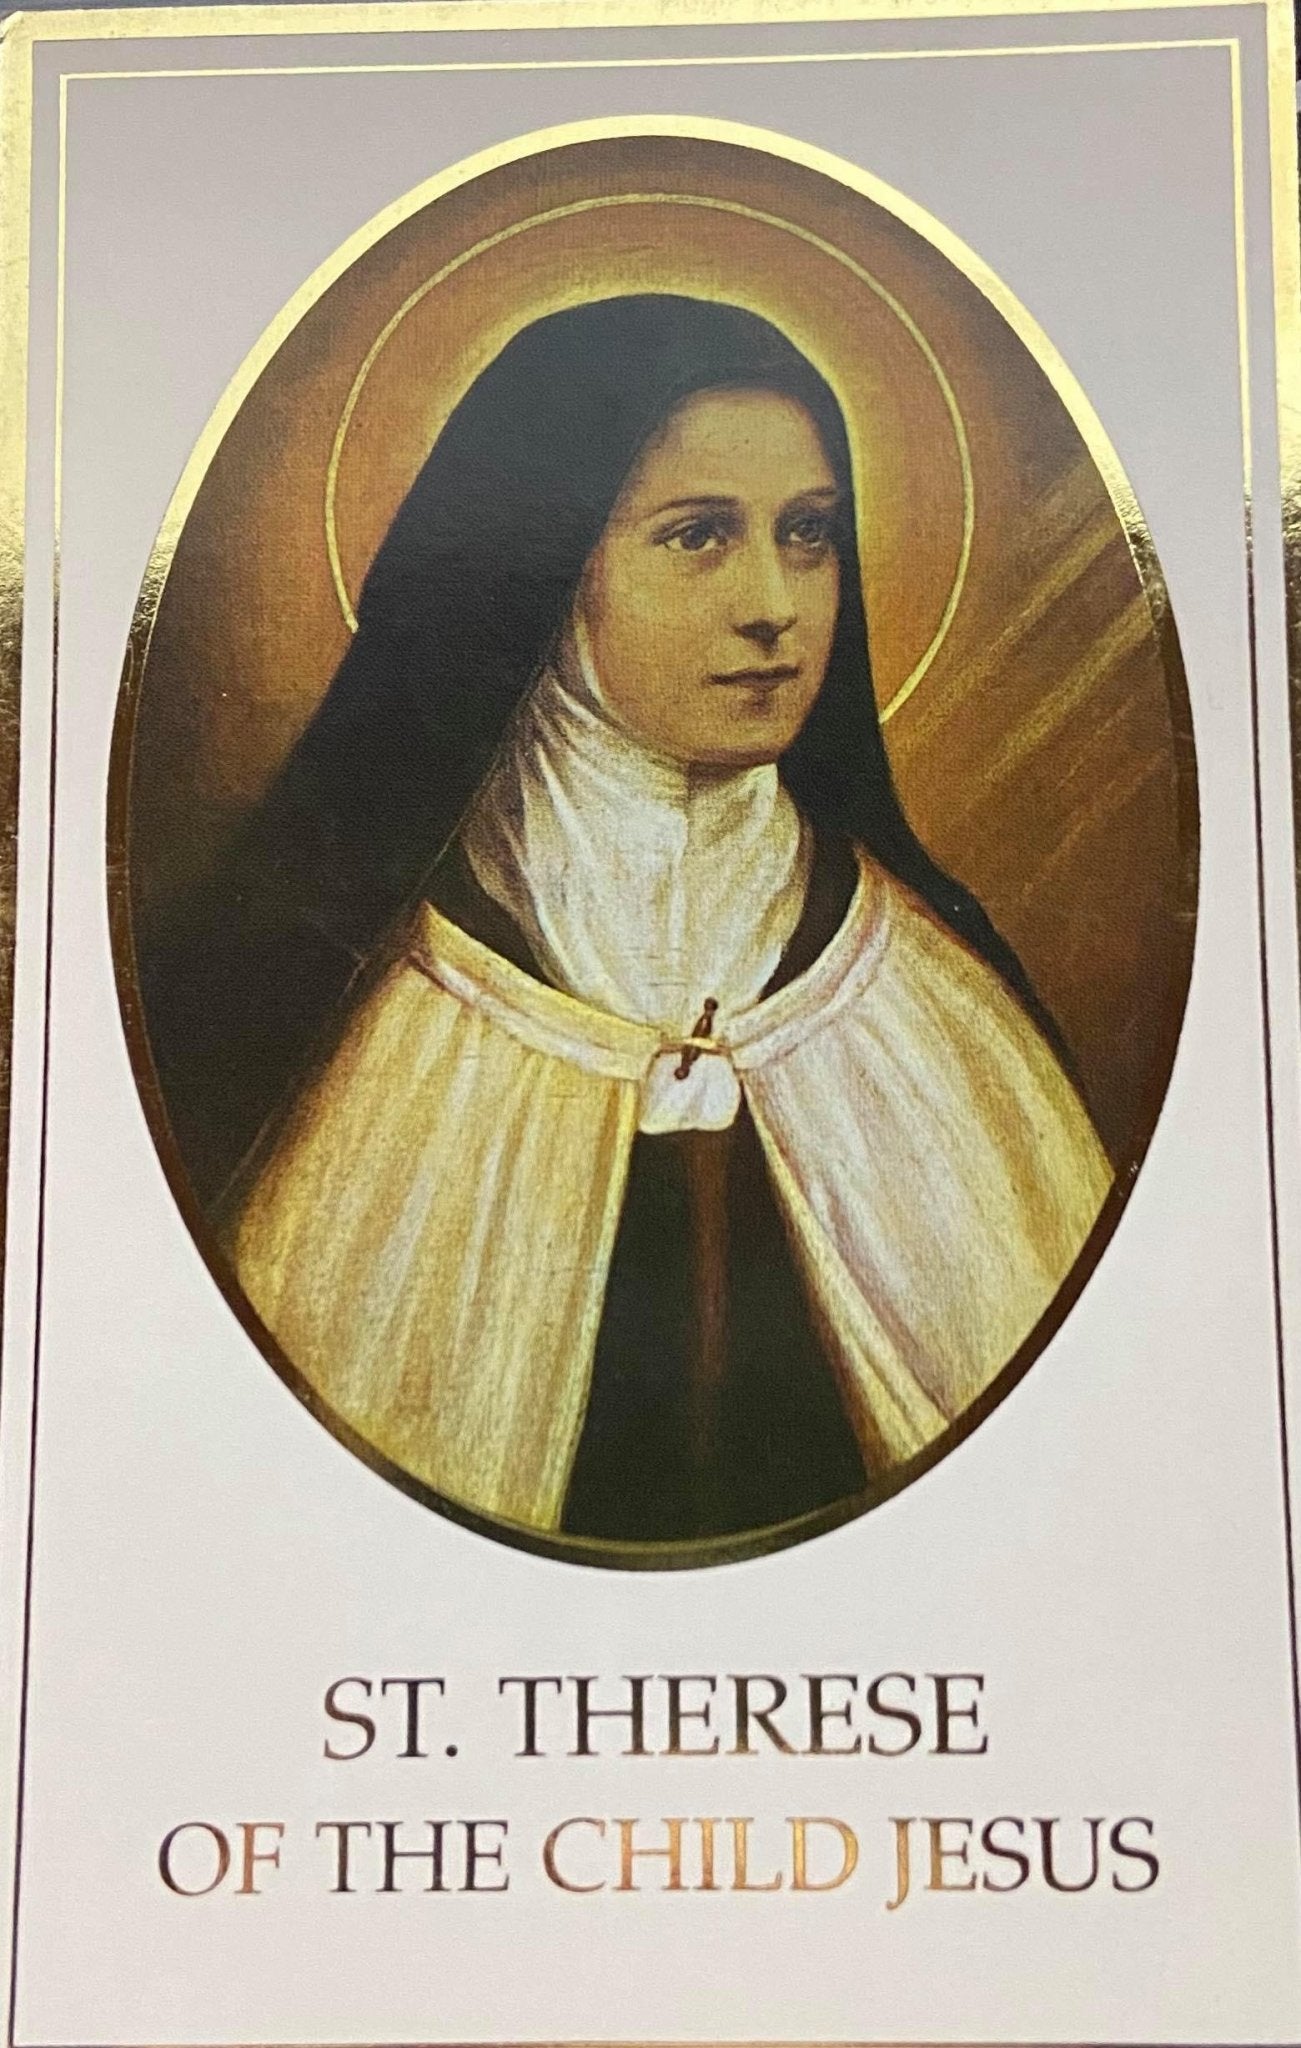 Book Pamphlet Saint Therese Of The Child Jesus English - Ysleta Mission Gift Shop- VOTED El Paso's Best Gift Shop